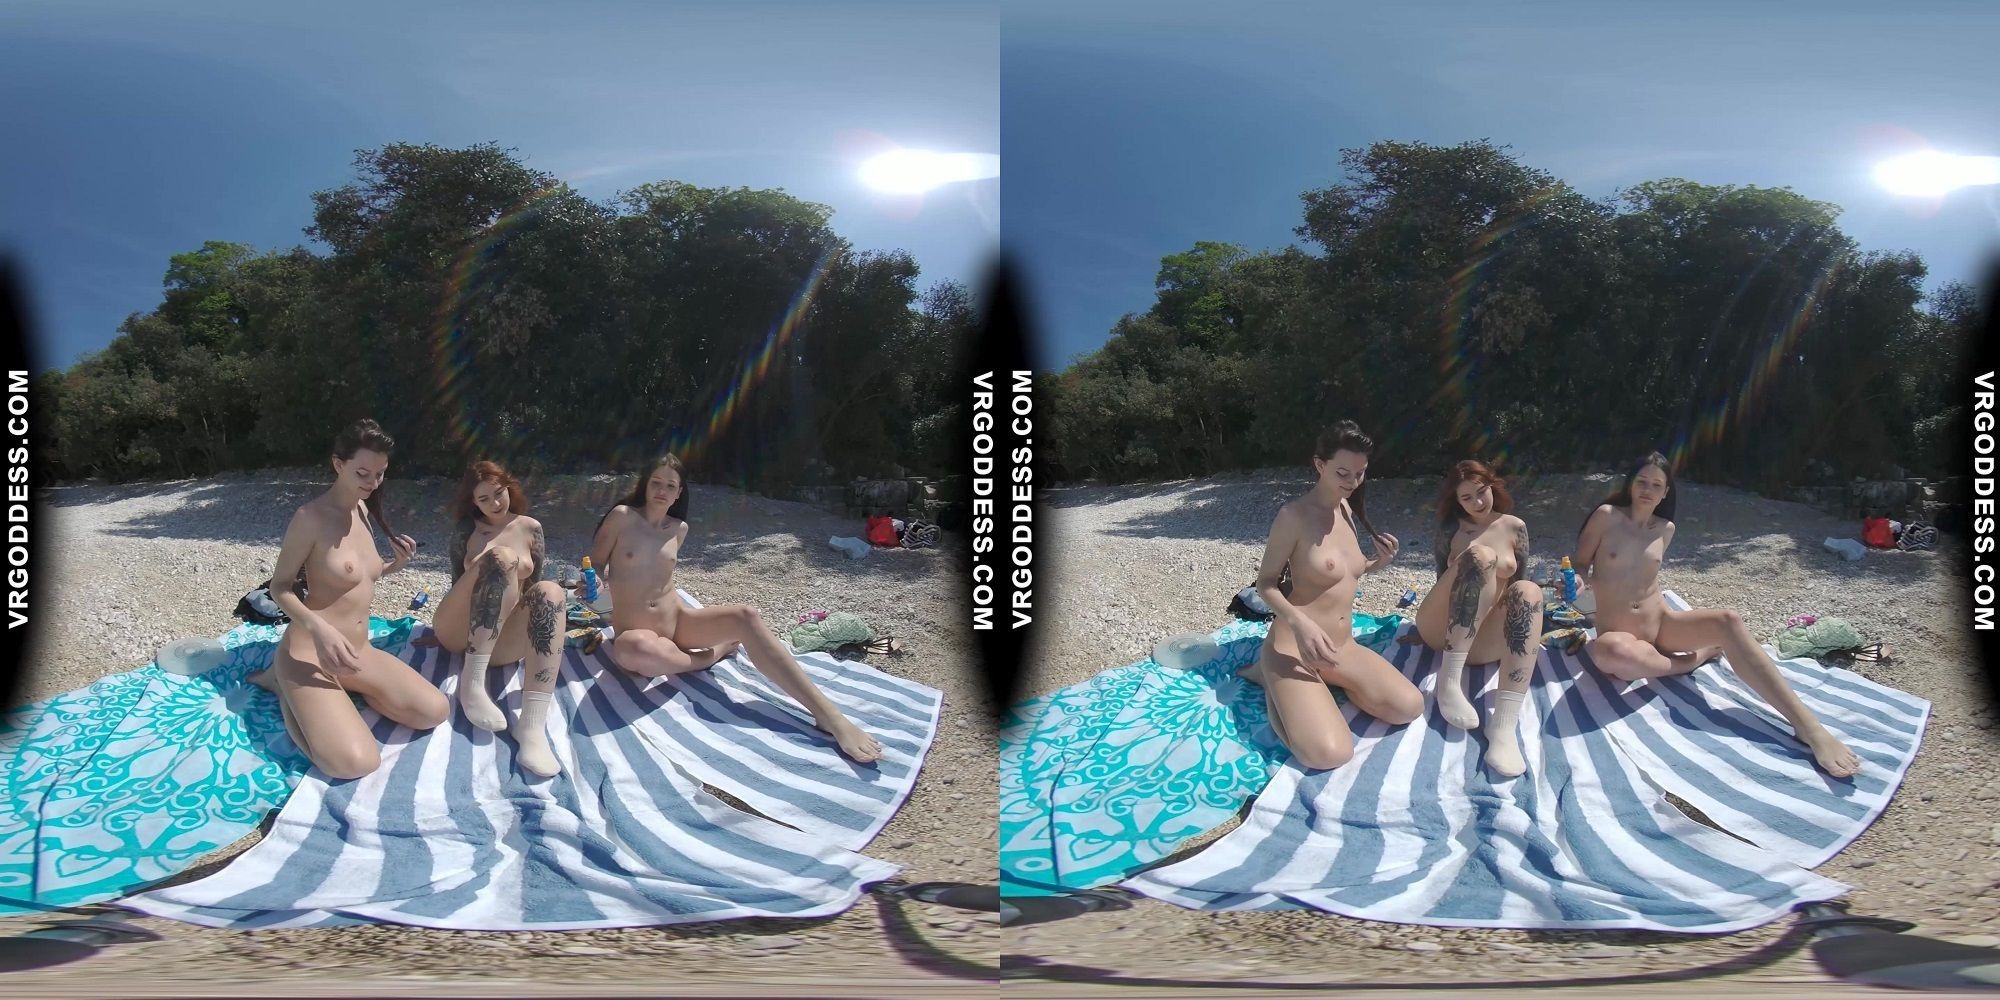 3 Babes Naked On Vacation Beach Picnic Playing Frisbee Searching For Shells... Slideshow